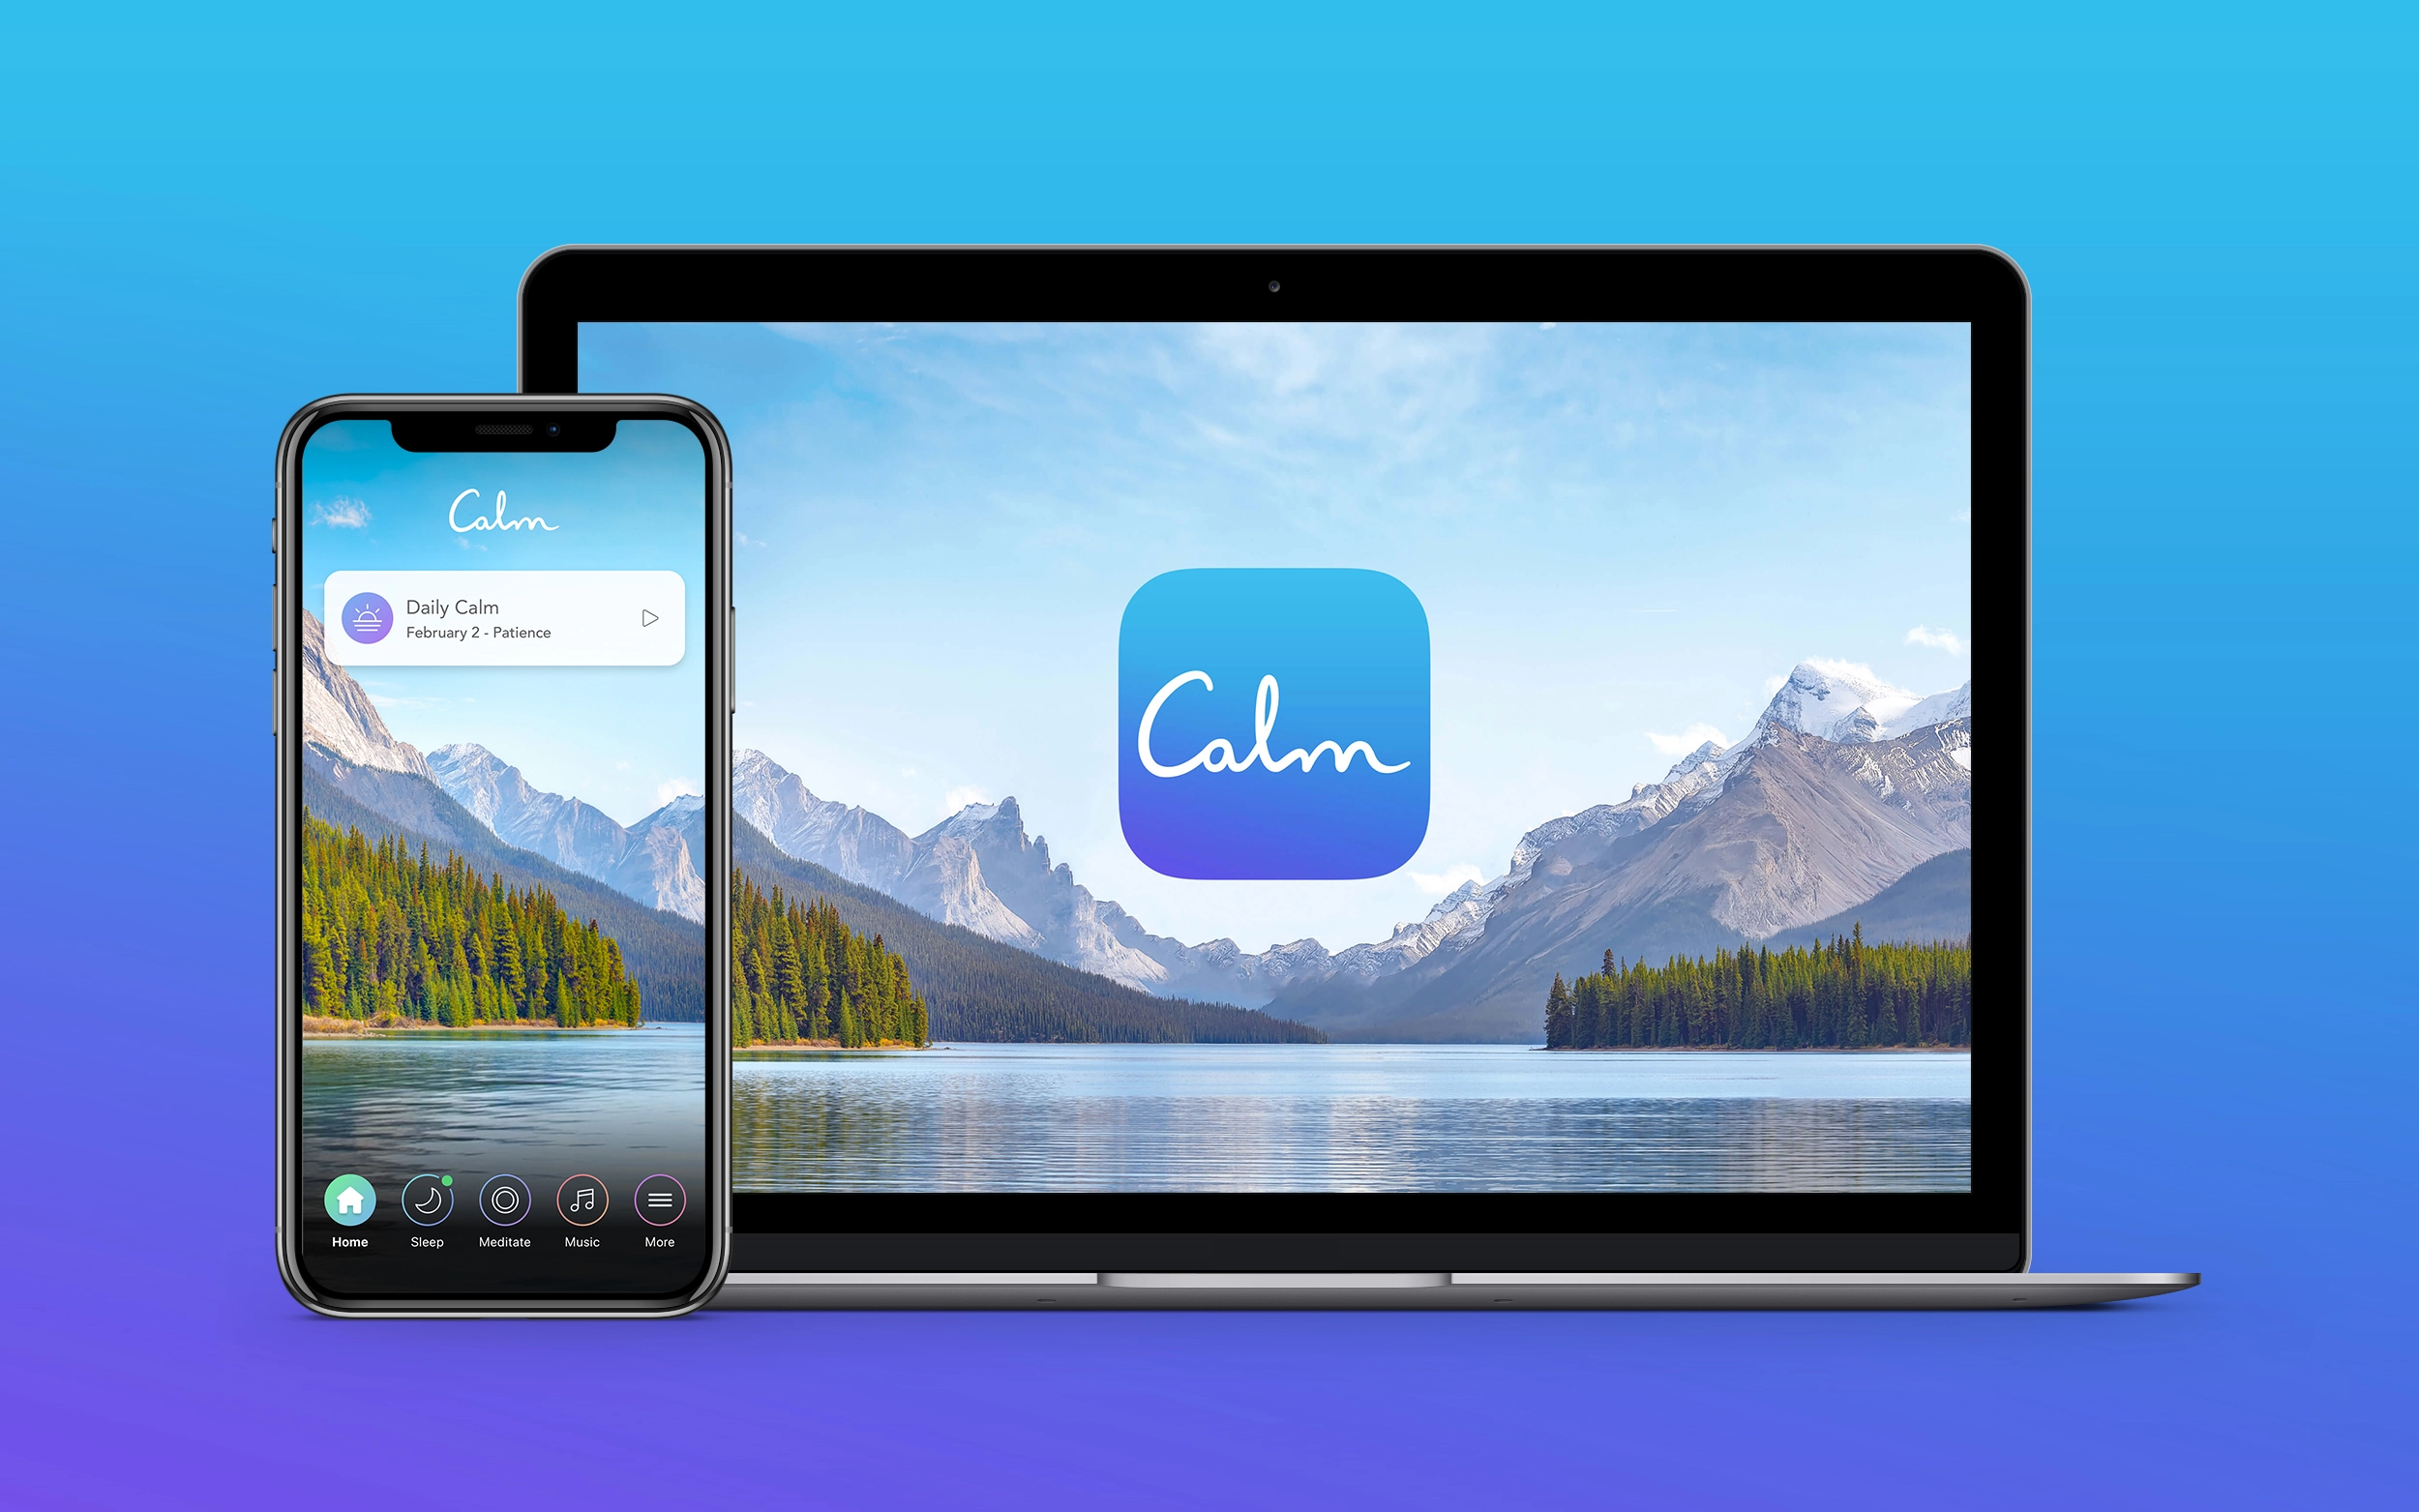 Calm Premium - 3 Months Trial Subscription Key (ONLY FOR NEW ACCOUNTS) 0.8 usd